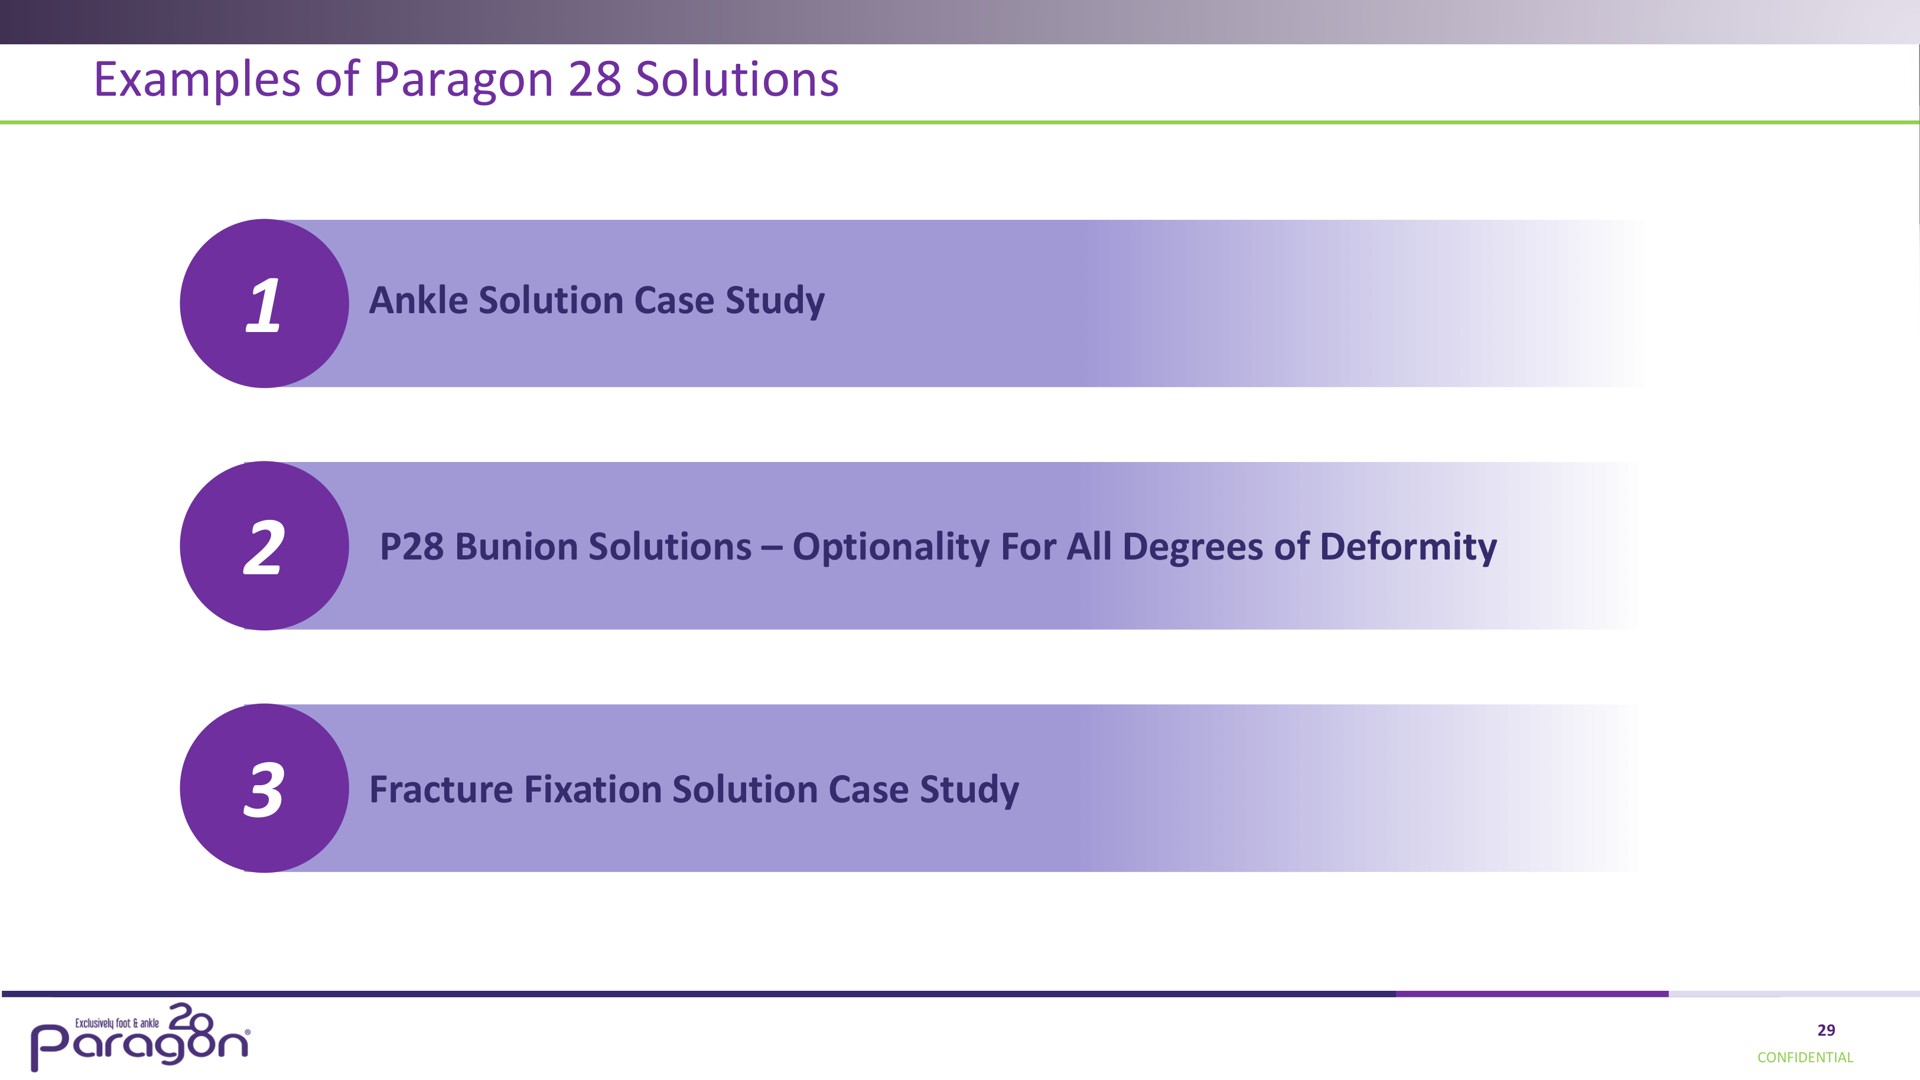 examples of paragon solutions | Paragon28